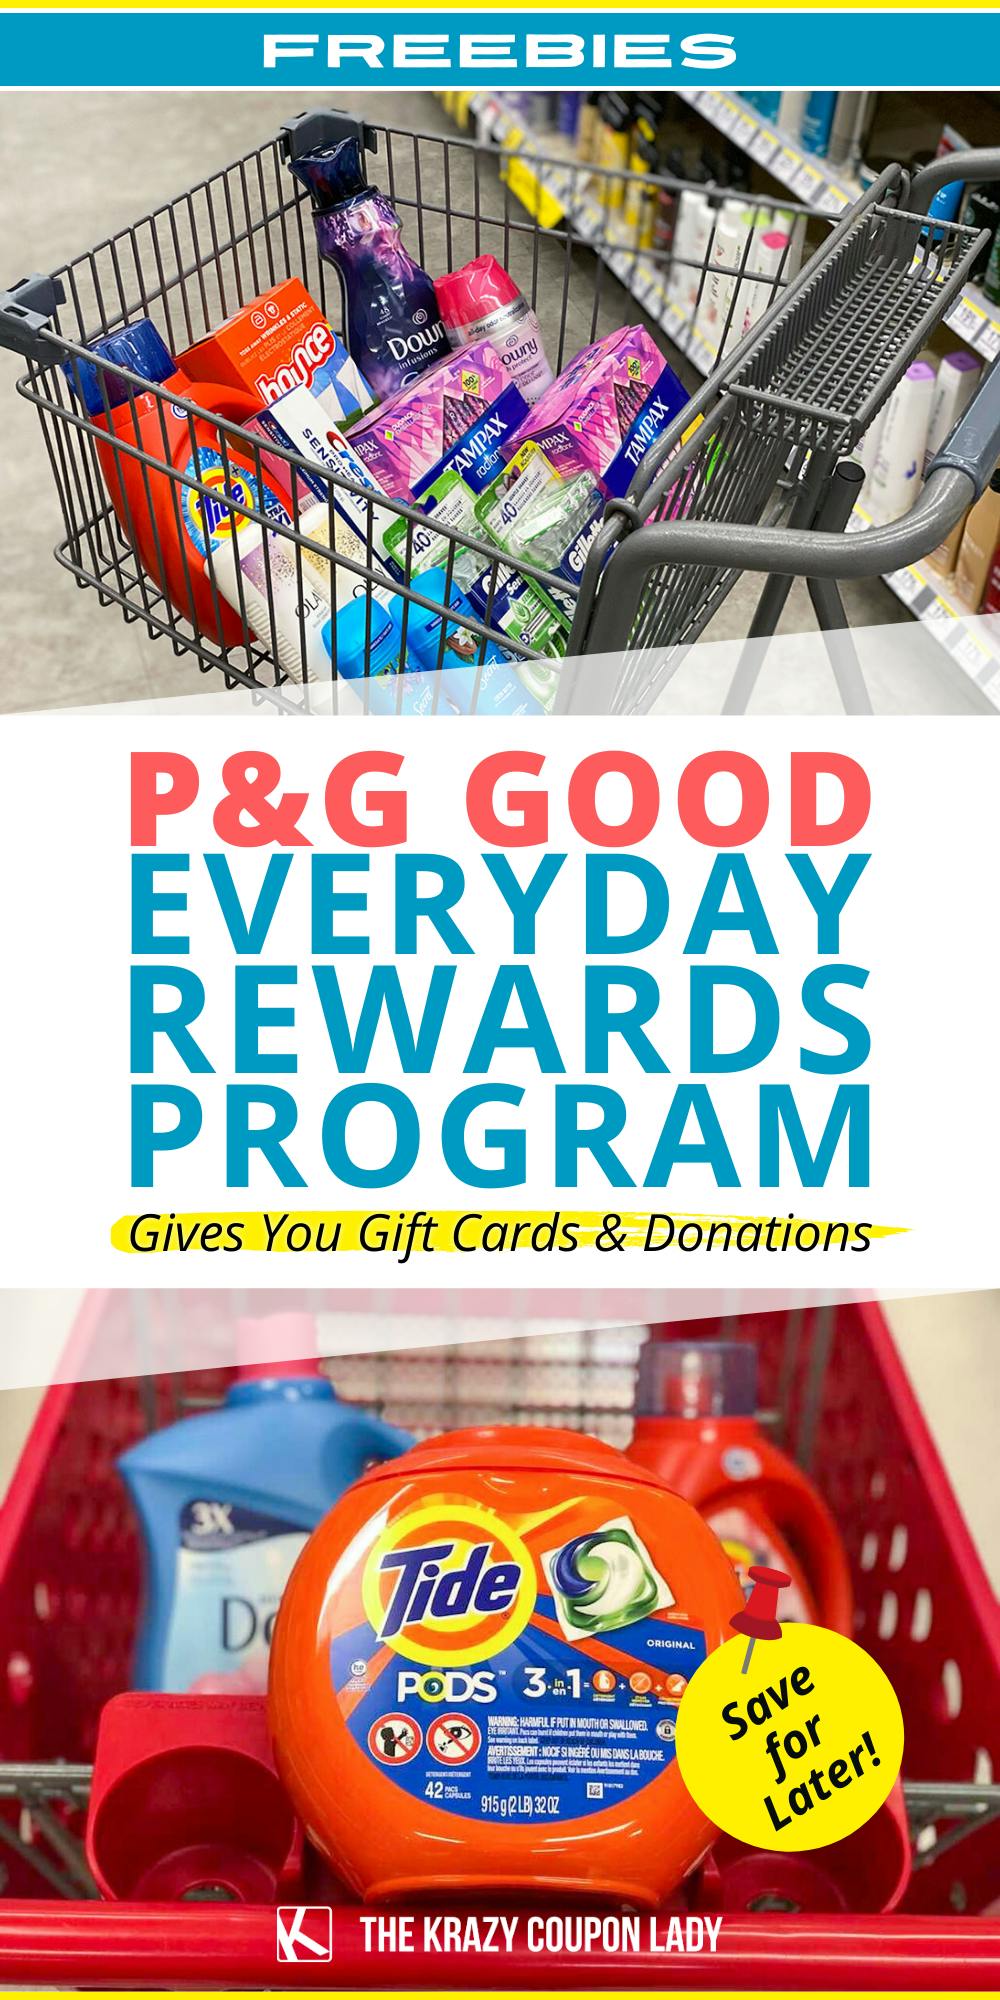 P&G Good Everyday Rewards Program Gives You Gift Cards & Donations ...